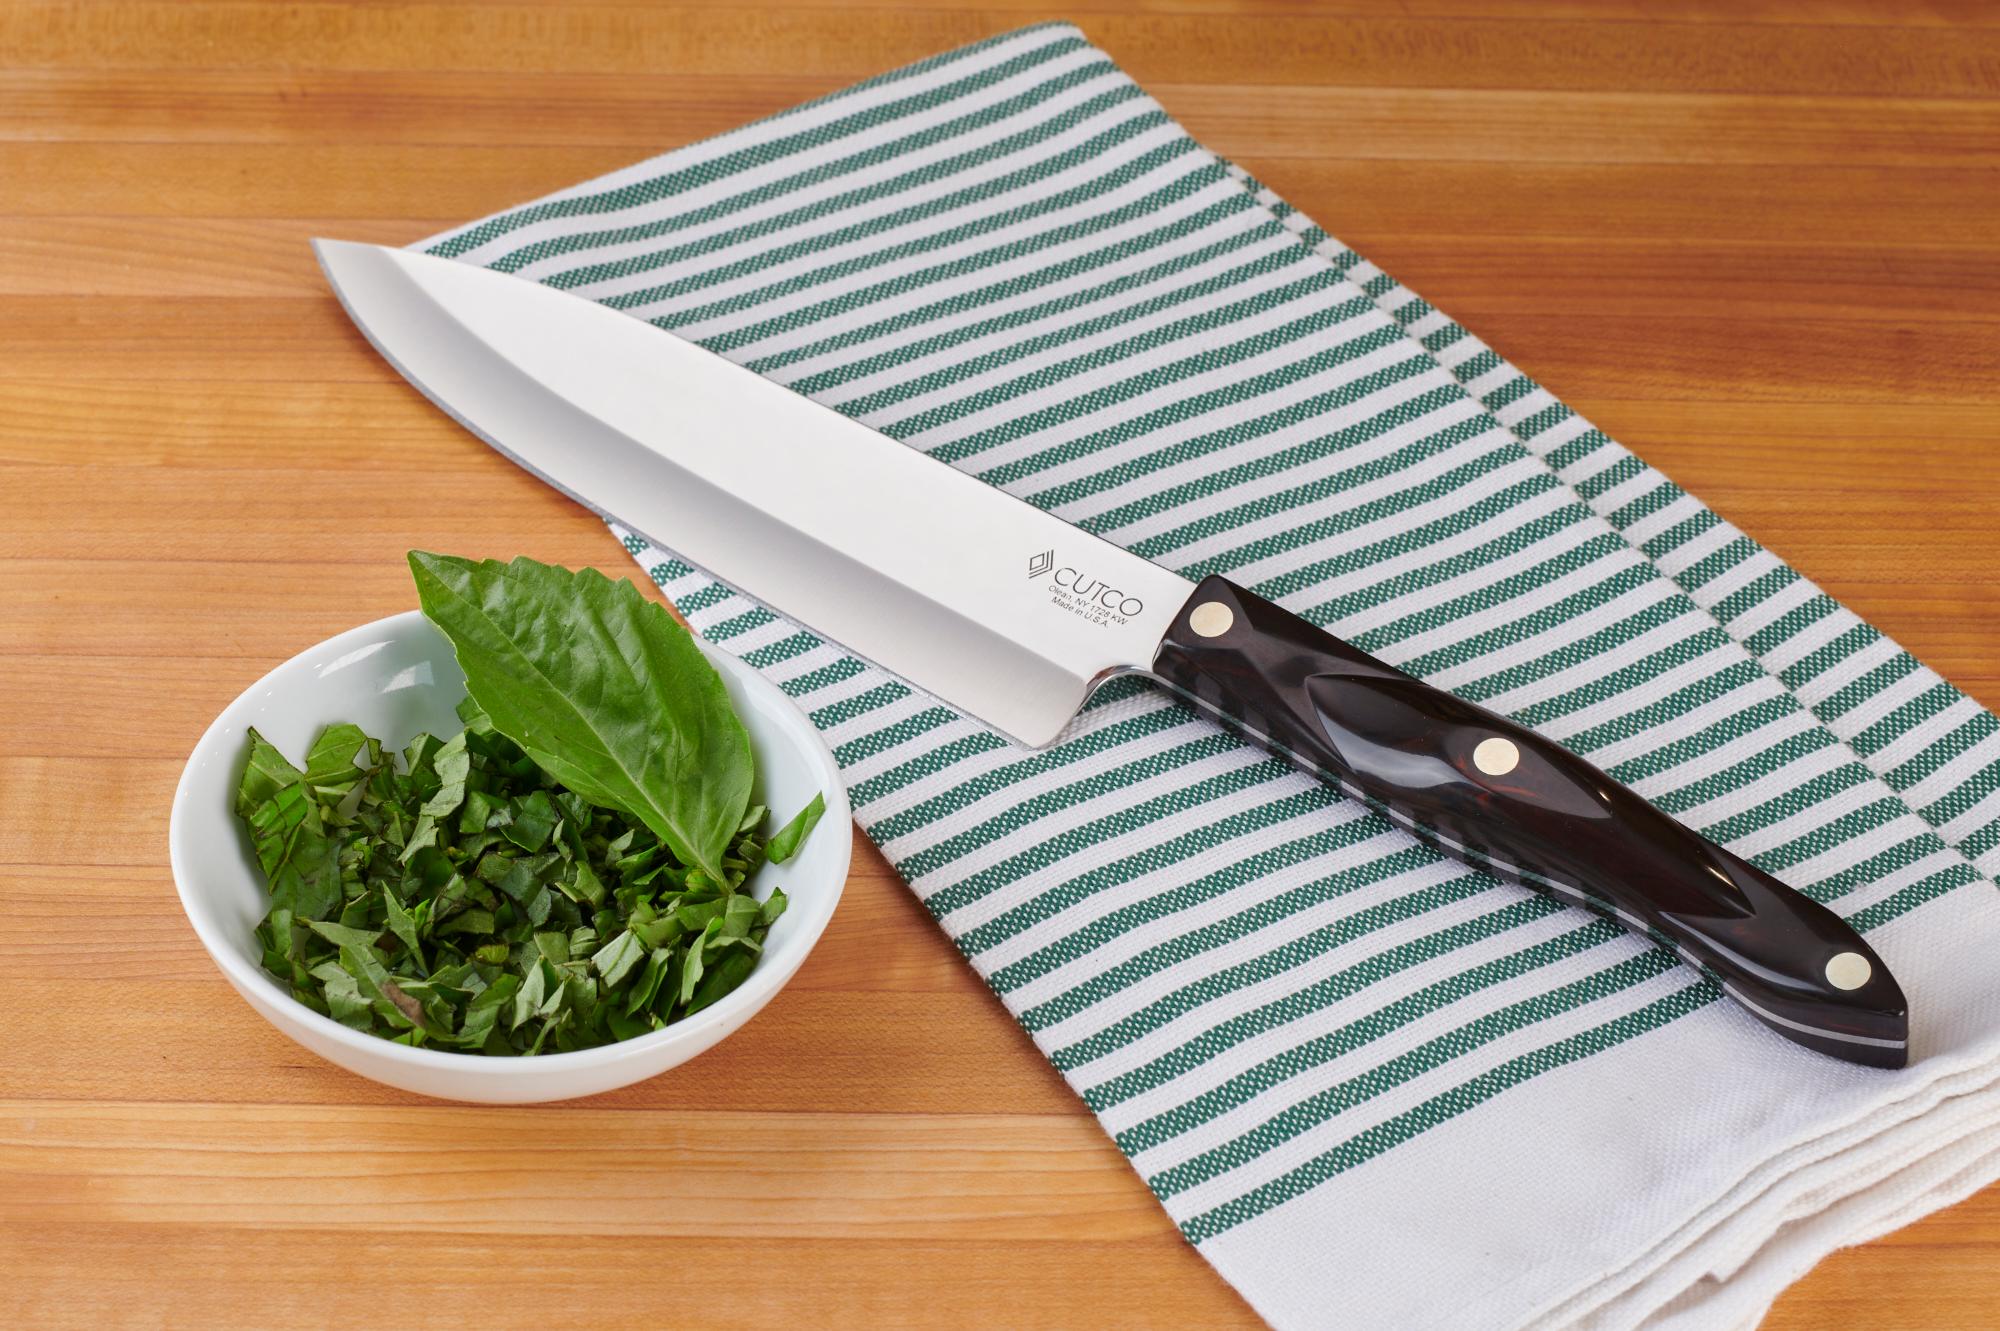 Chopped basil with a Petite Chef.